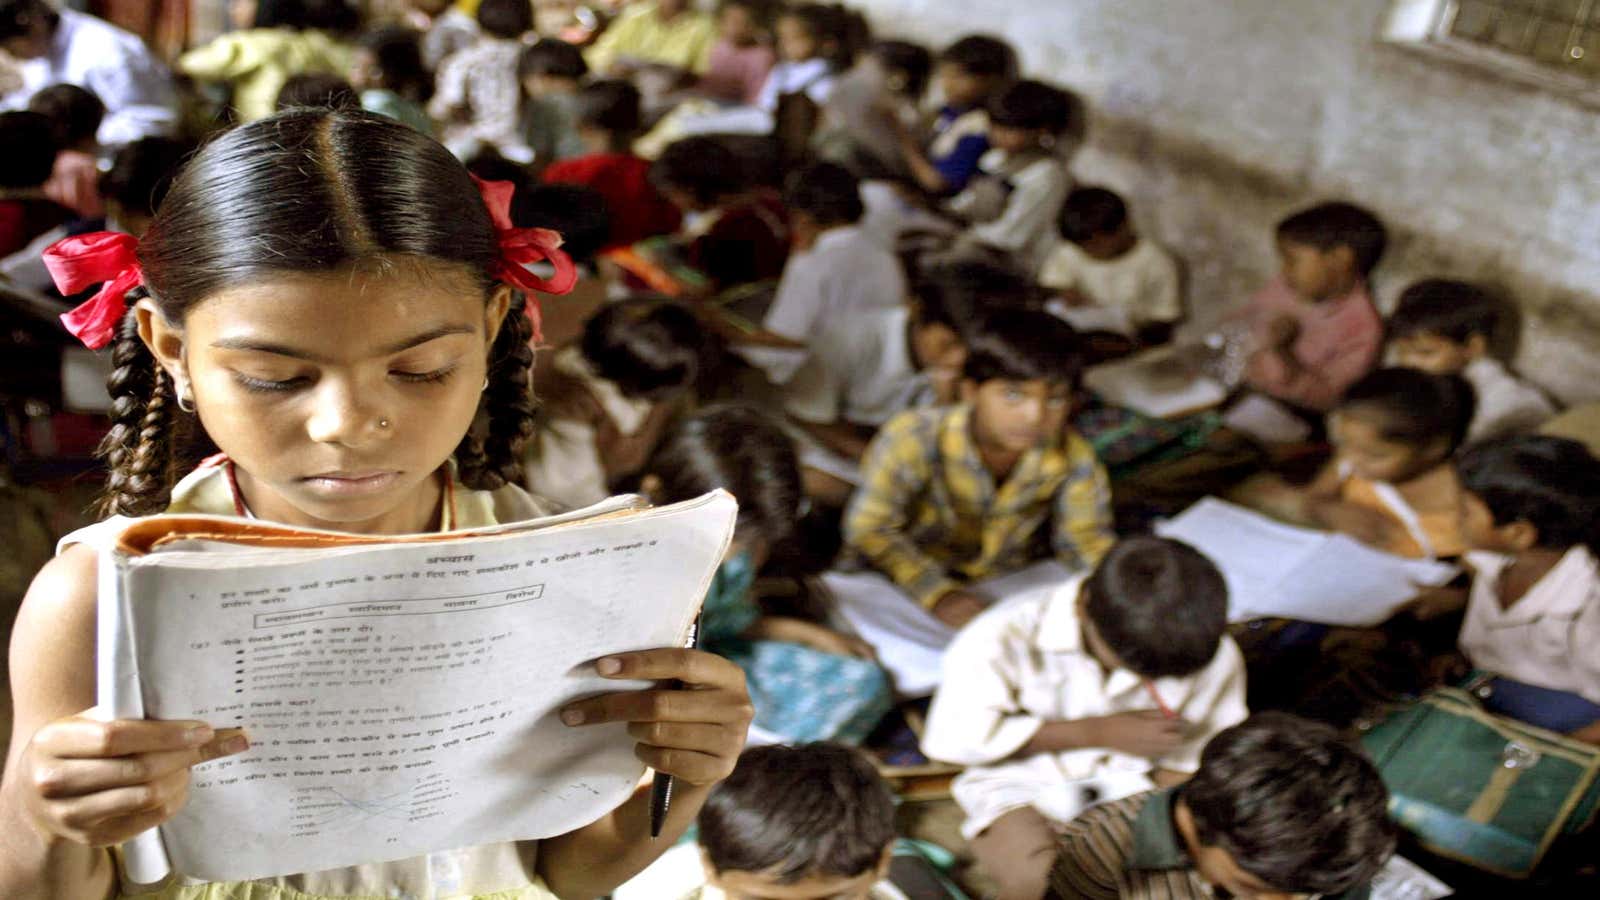 Around 84% of Indian schools have functional toilets for girls.